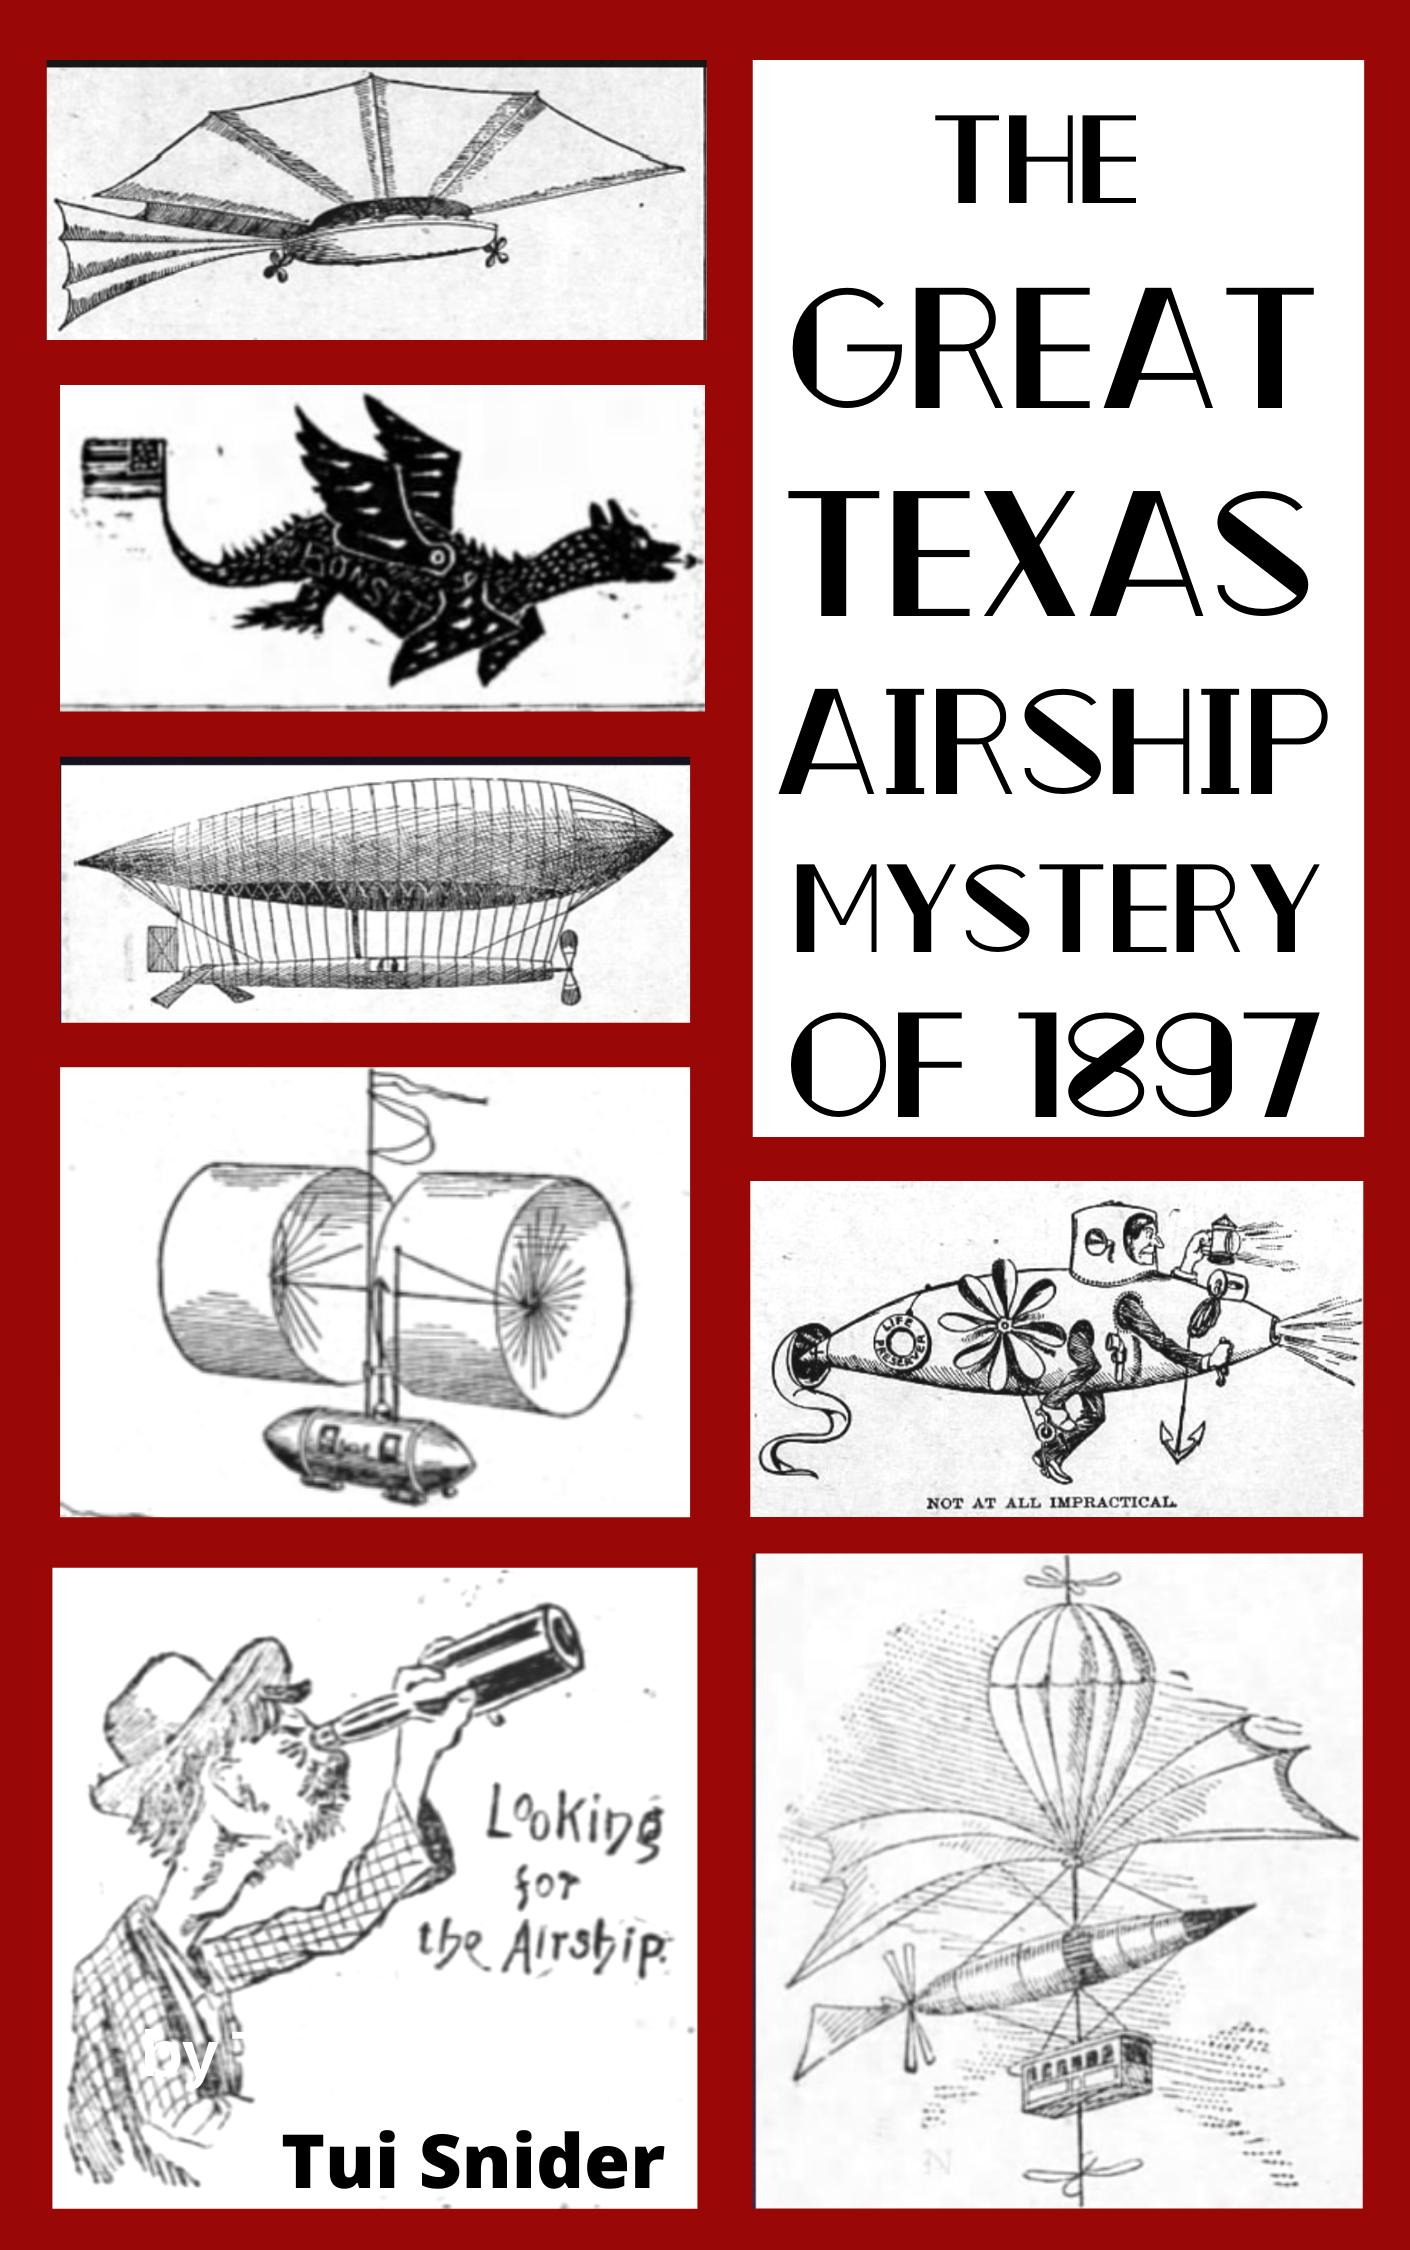 1897 Airships of Texas by Tui Snider